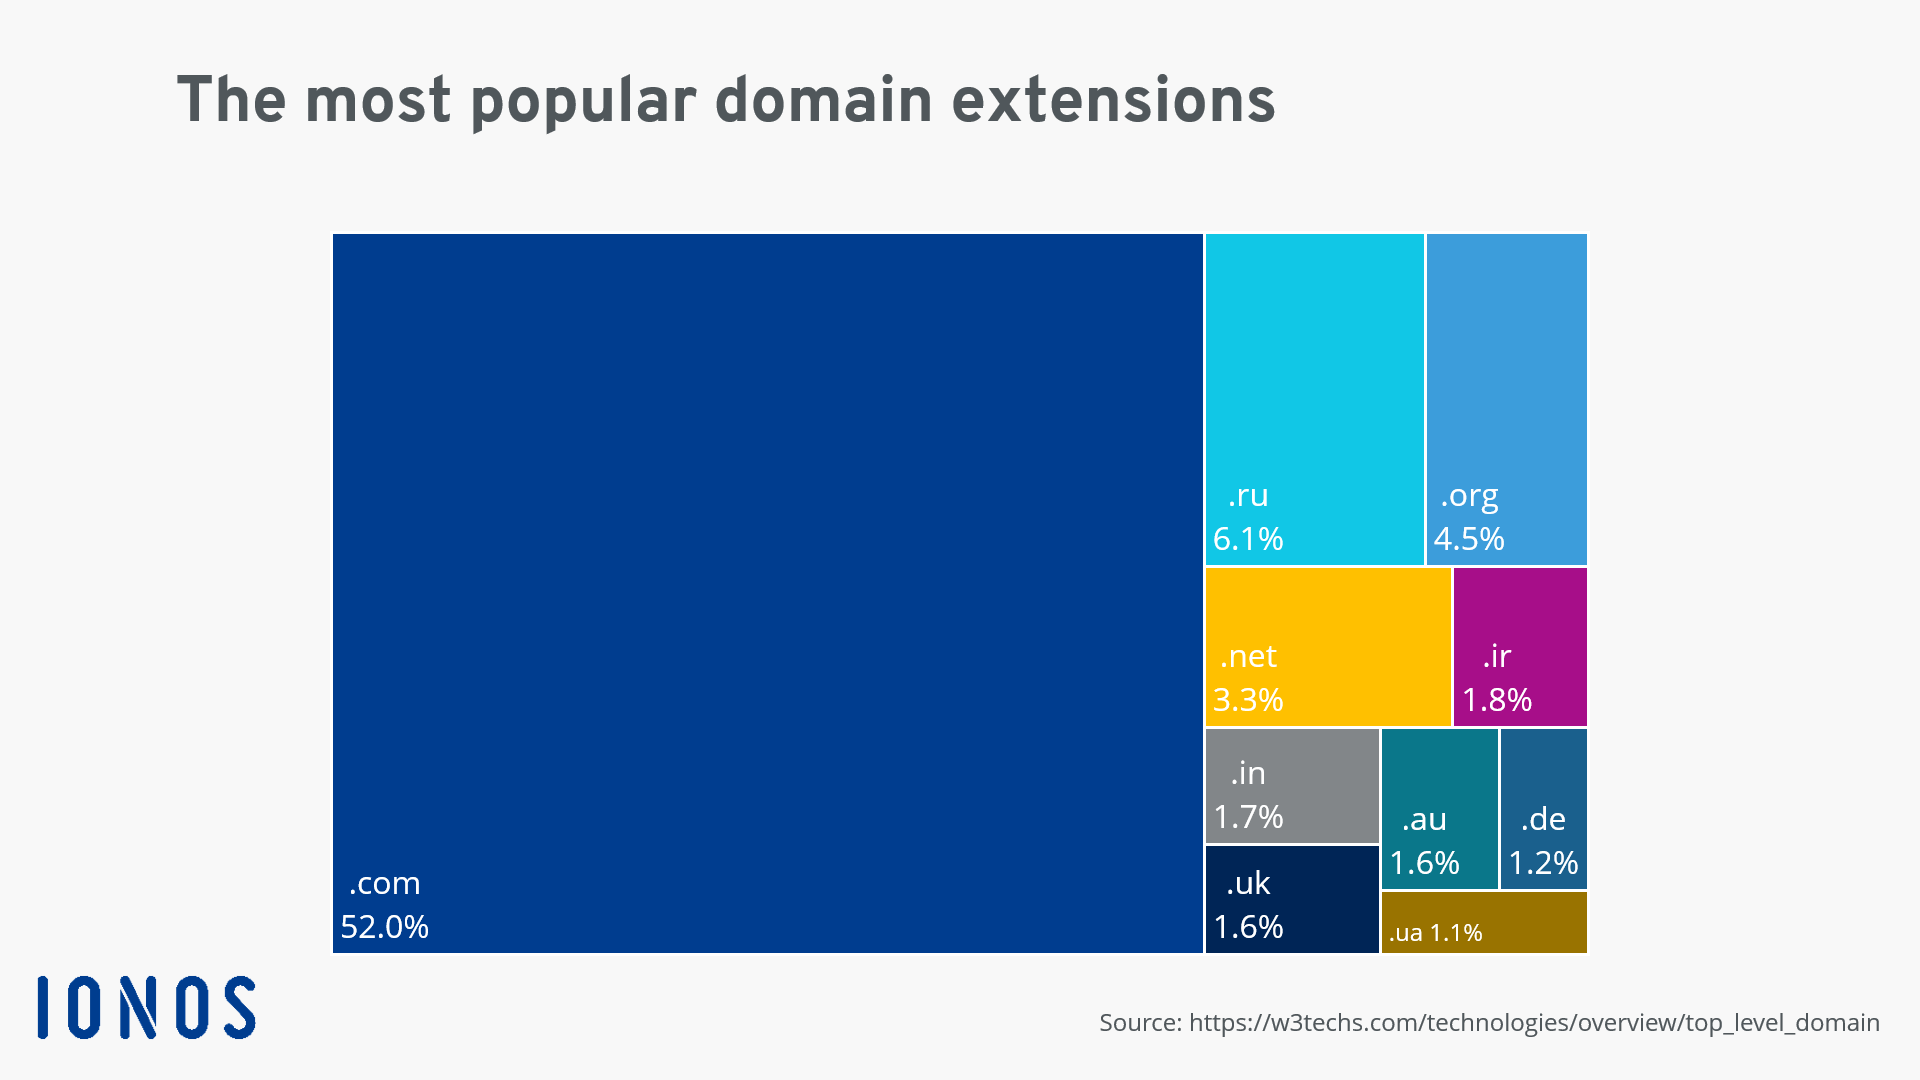 Diagram of the 10 most popular domain extensions according to W3Techs.com